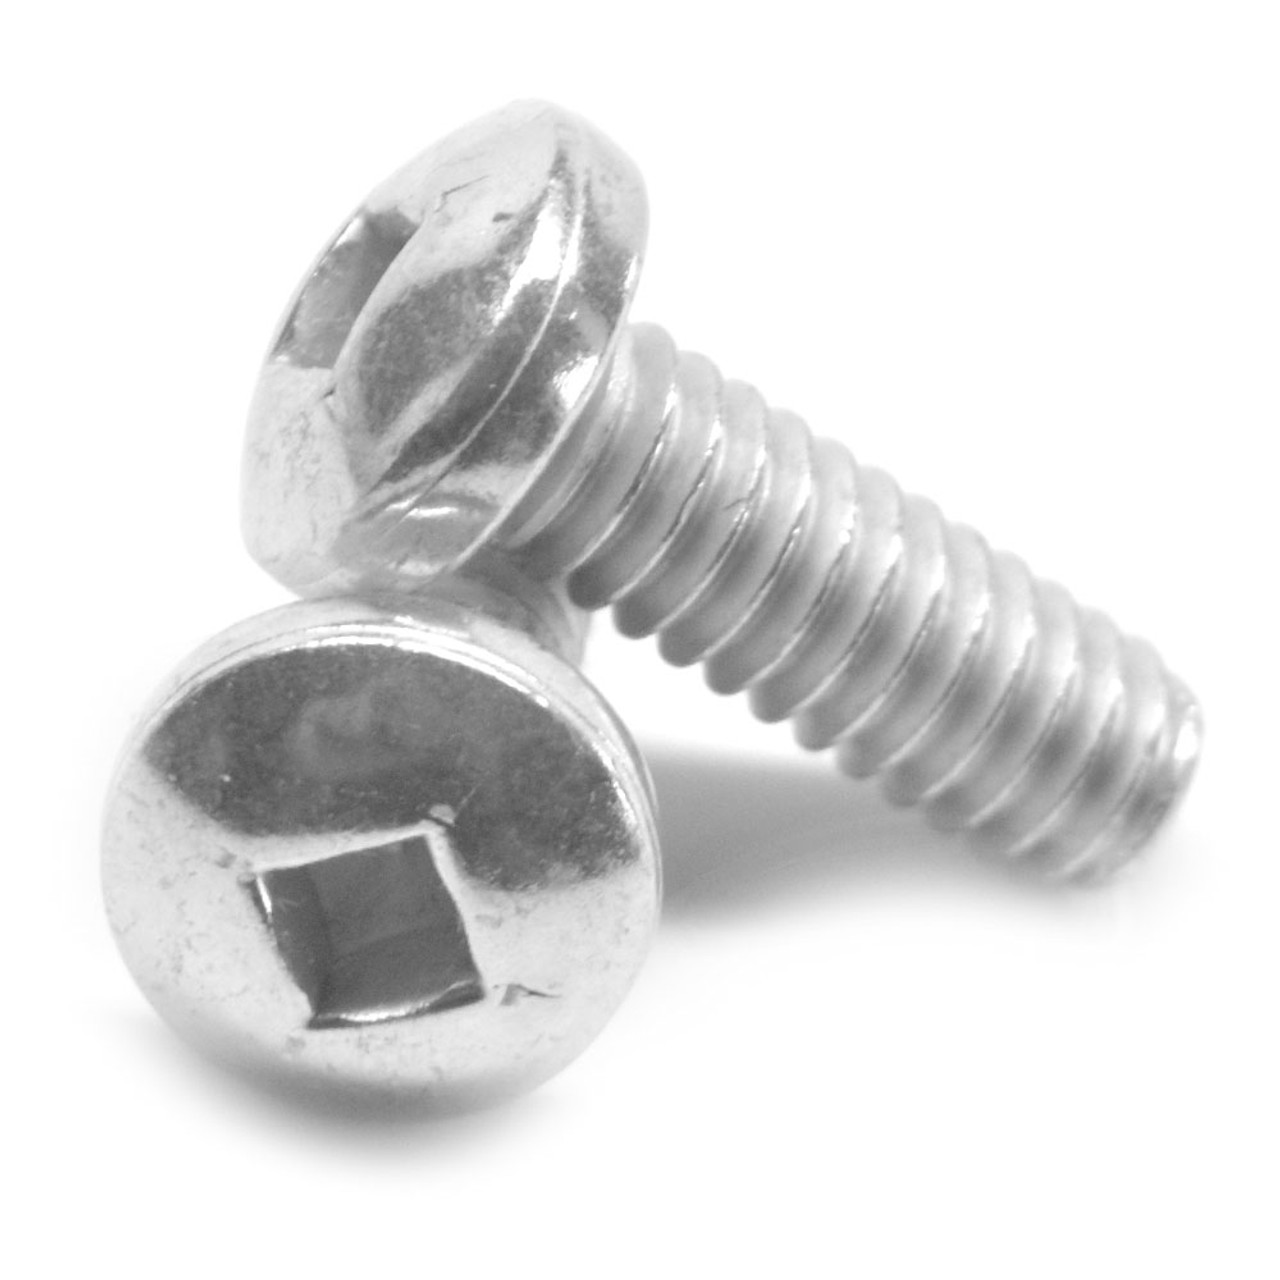 1/4"-20 x 1 1/4" (FT) Coarse Thread Machine Screw Square Drive Pan Head Stainless Steel 18-8